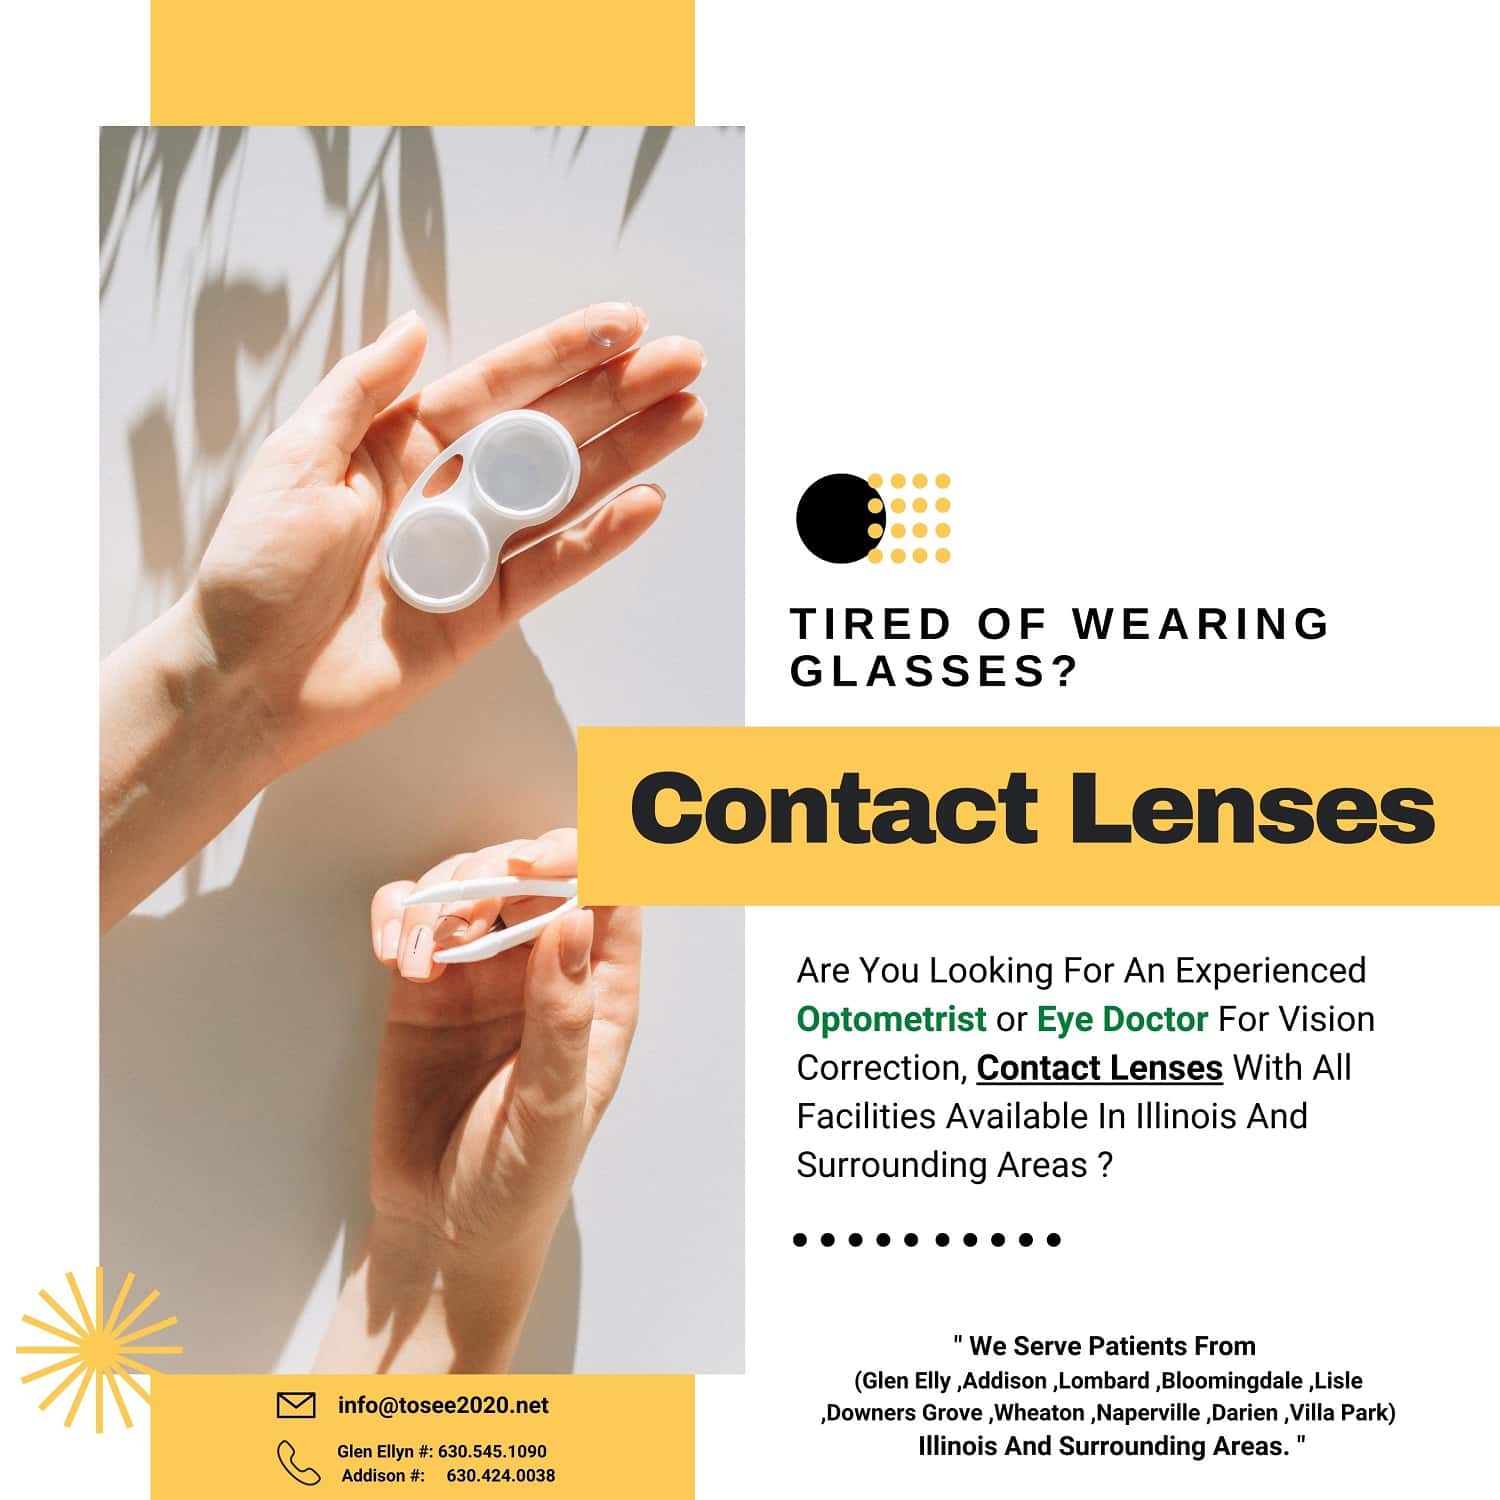 Contact lenses - Tosee2020